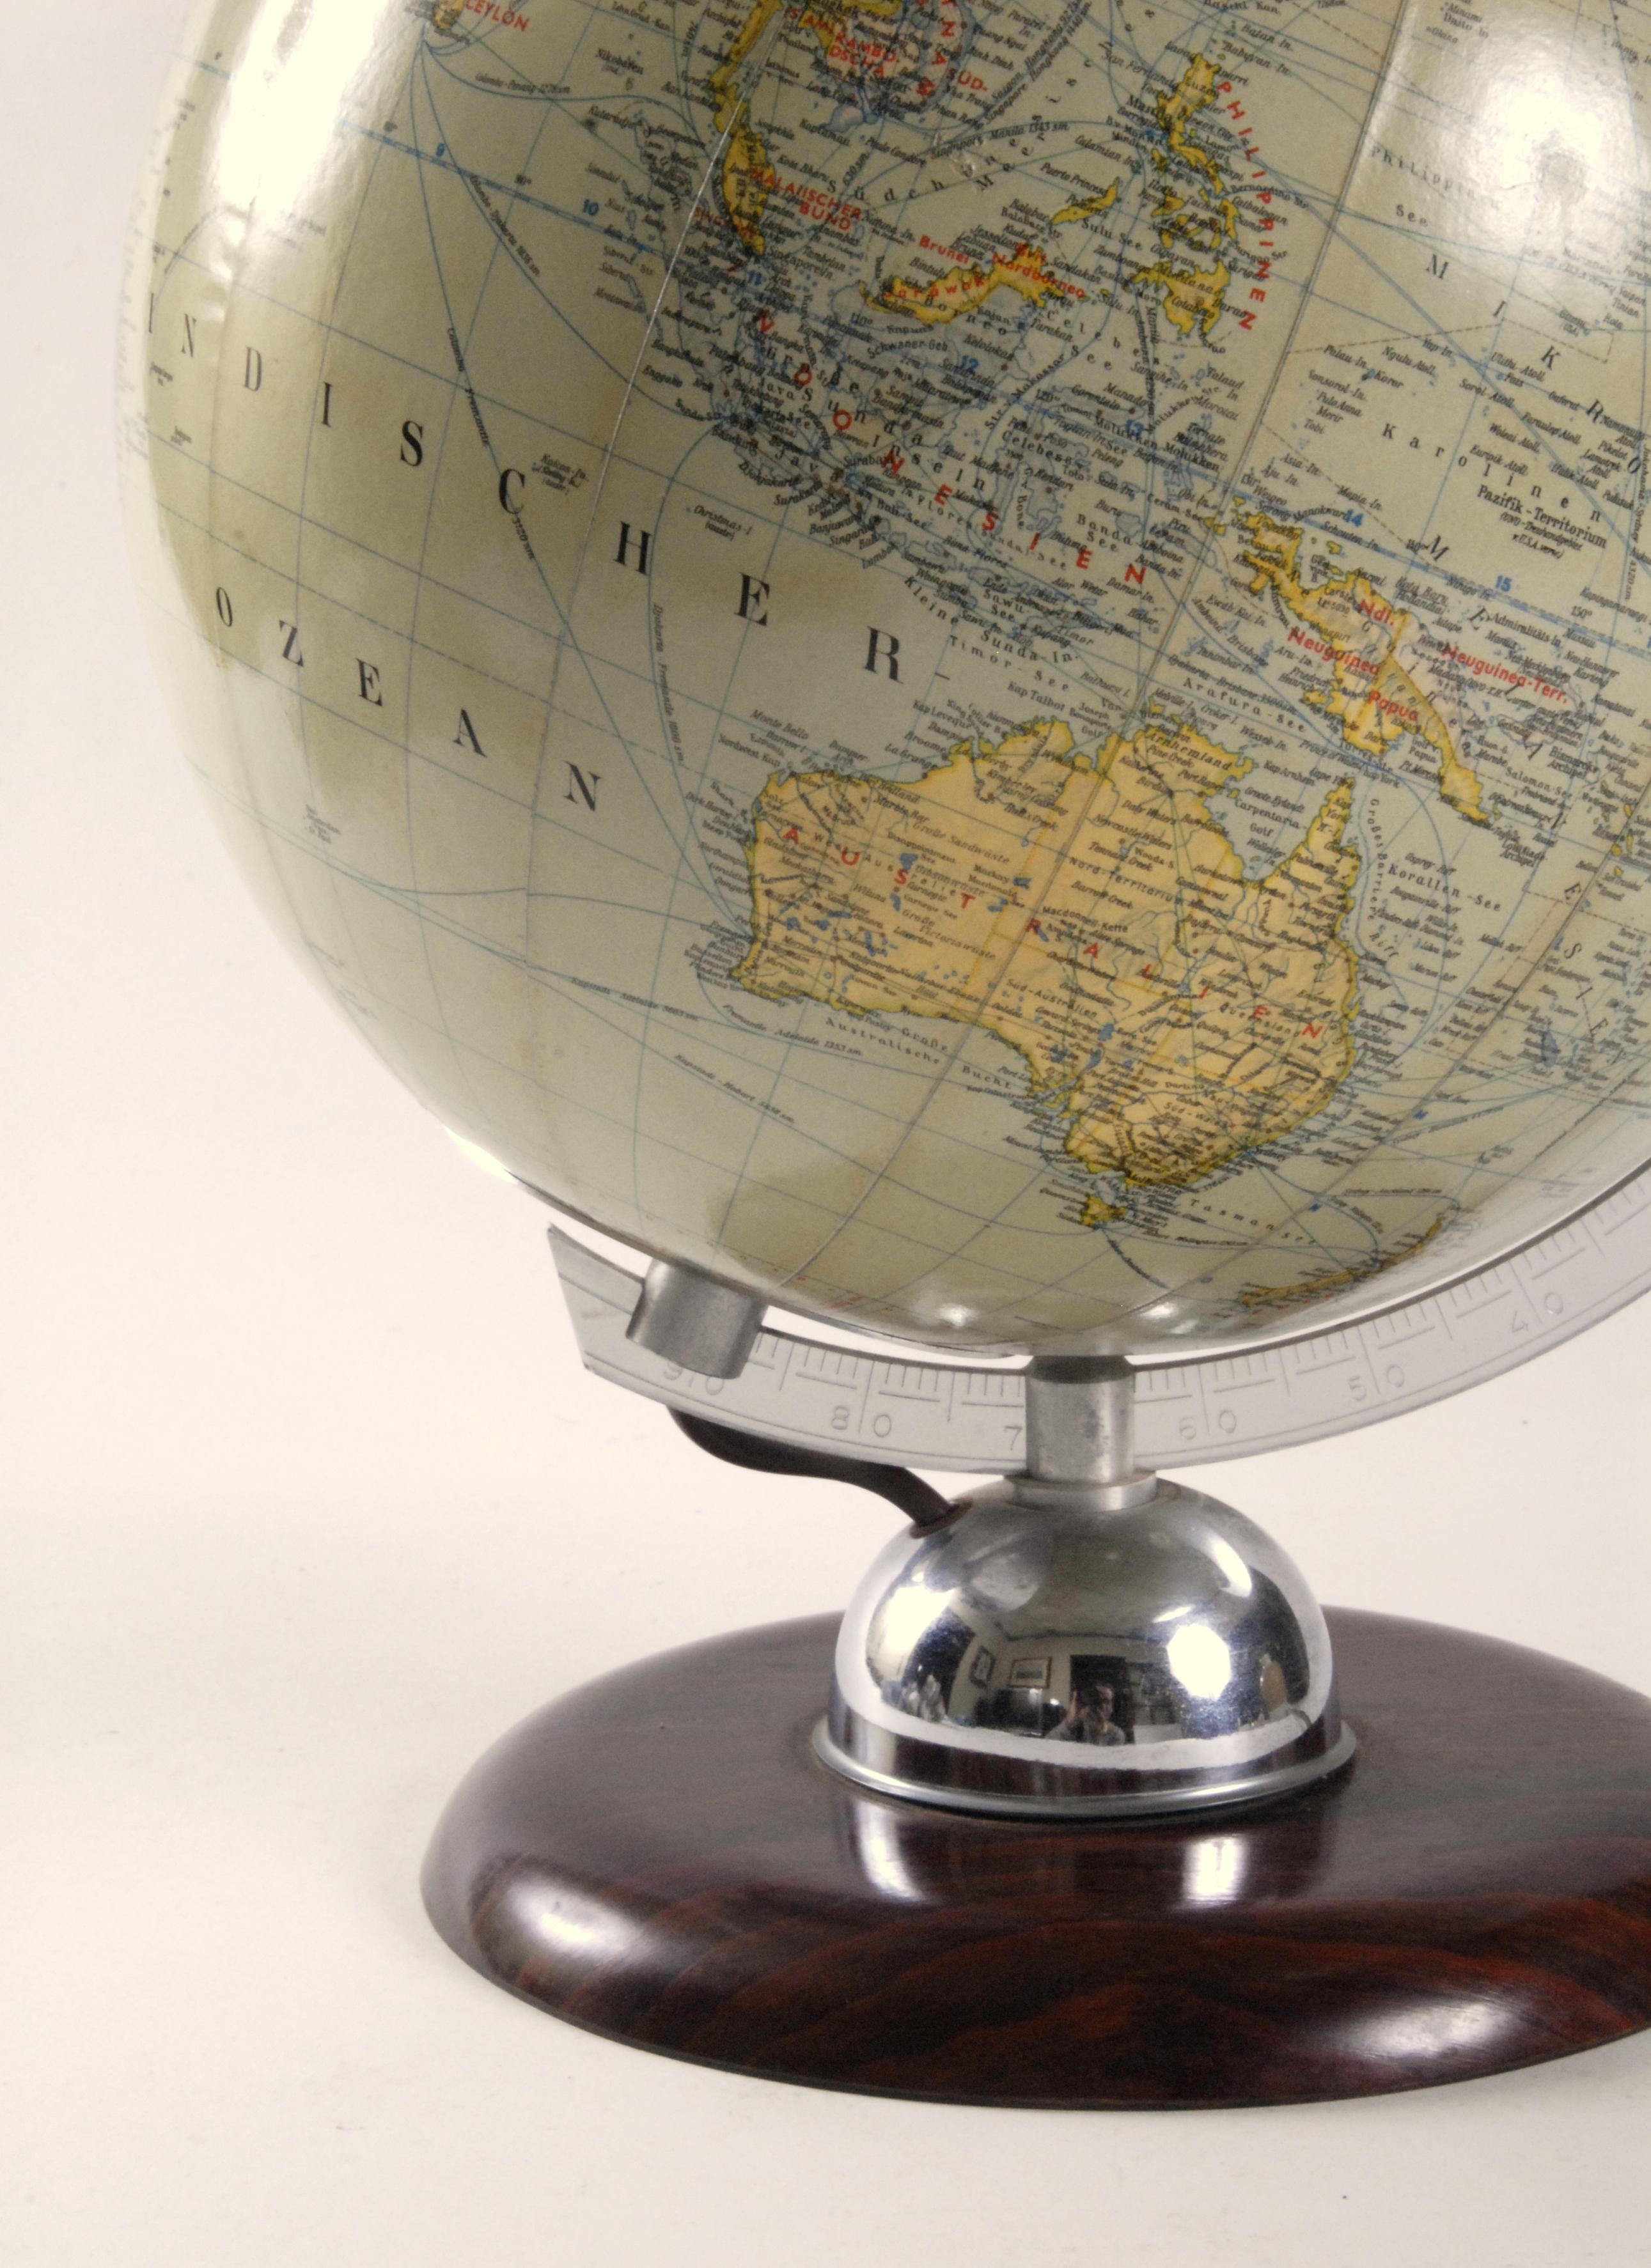 An excellent JRO made West Germany glass world globe light. Mounted on a Bakelite base with an aluminium gauge marked with latitude marks sitting on a chrome dome. The map paper is in excellent condition and when lit displays with a lovely soft warm